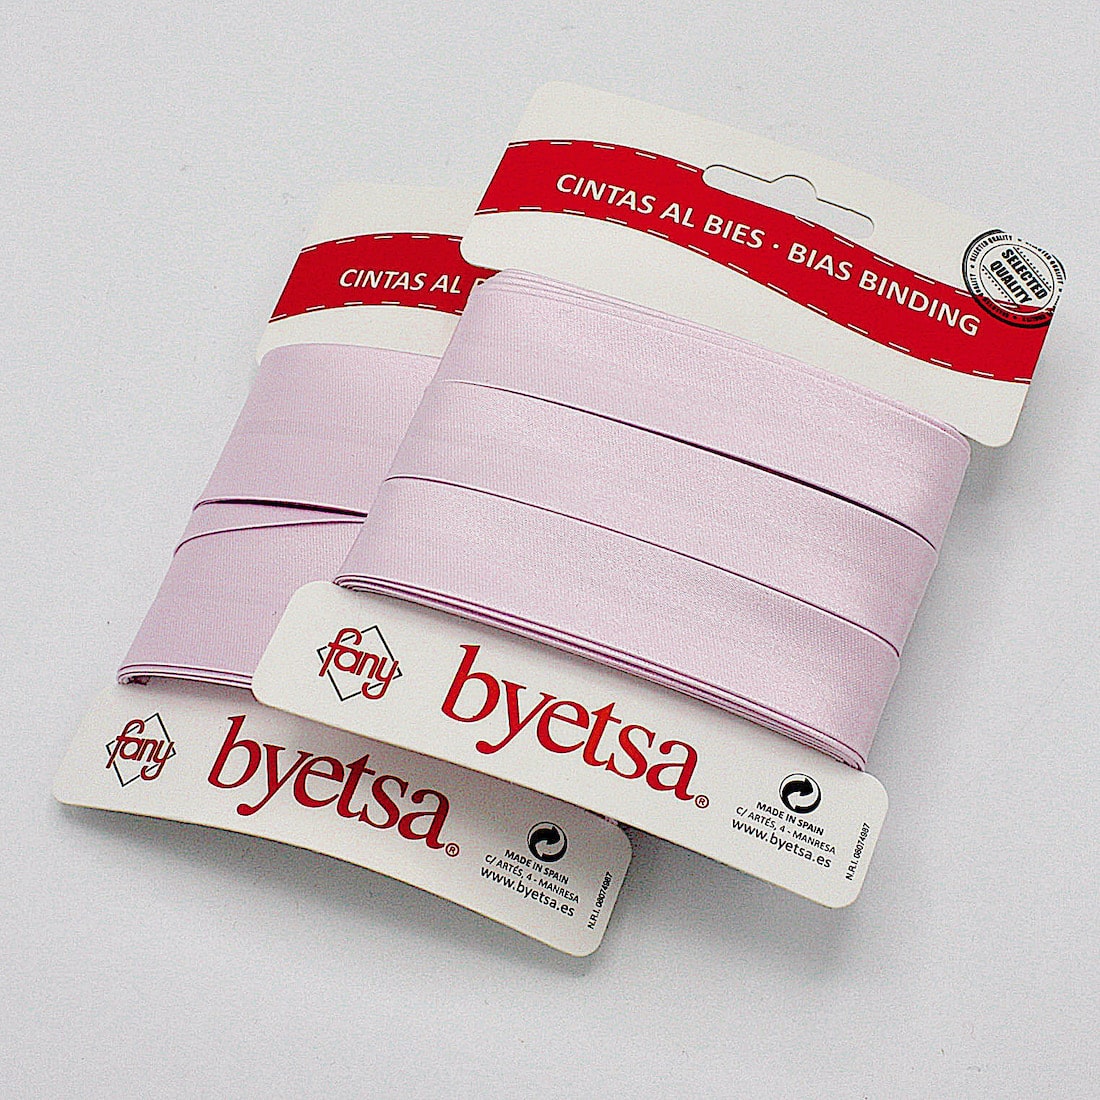 5 metres of Pre-packed Satin Bias Binding Tape in 18mm and 30mm width in Palest Lilac 268